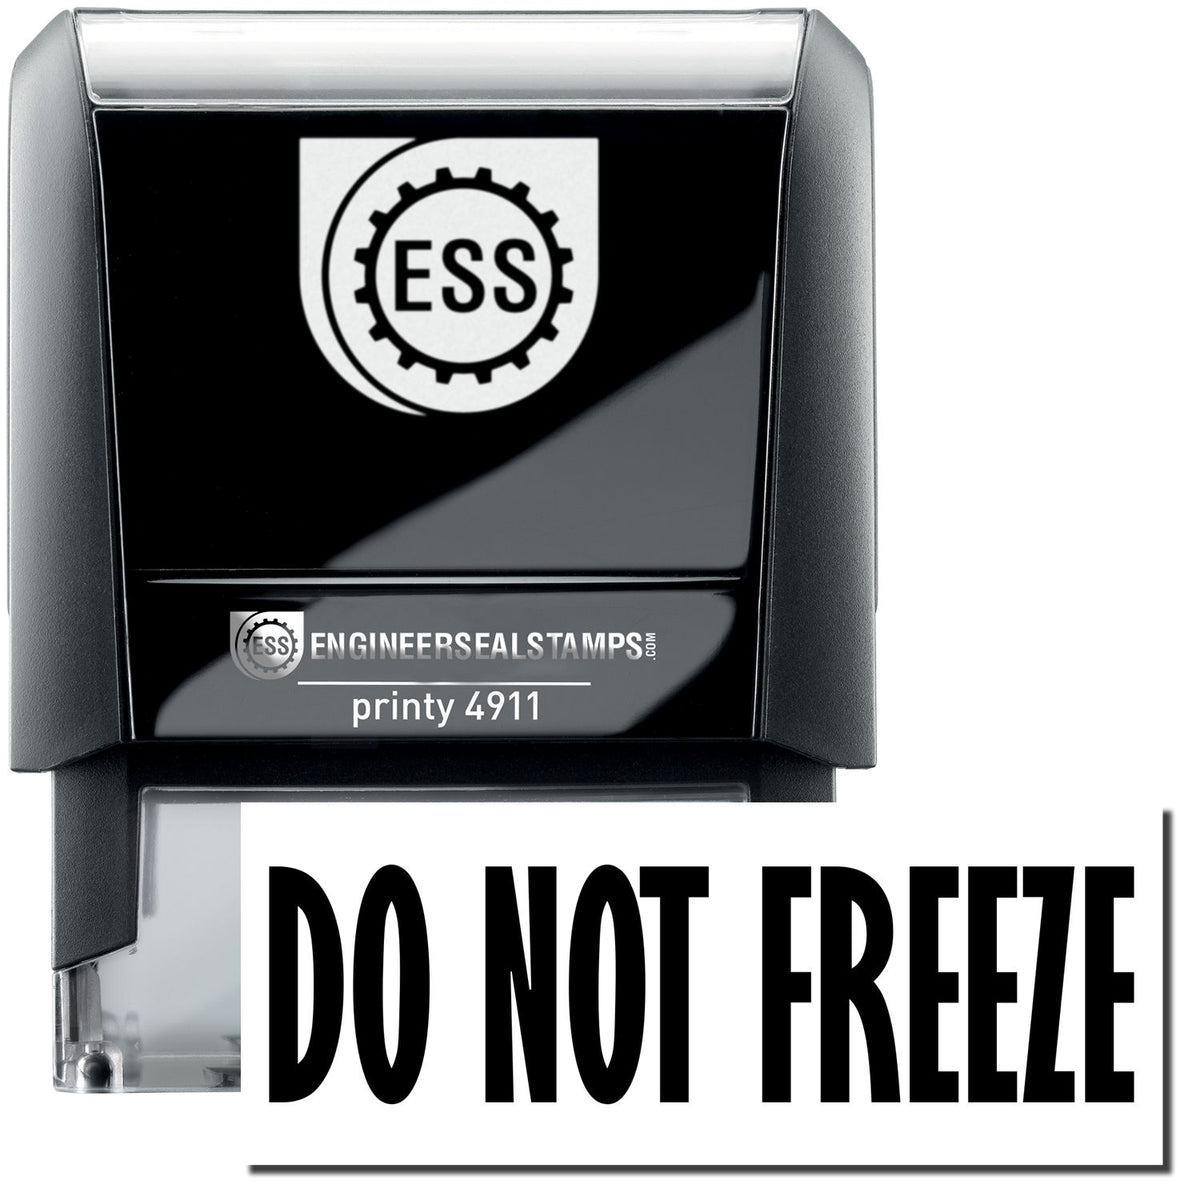 A self-inking stamp with a stamped image showing how the text &quot;DO NOT FREEZE&quot; is displayed after stamping.